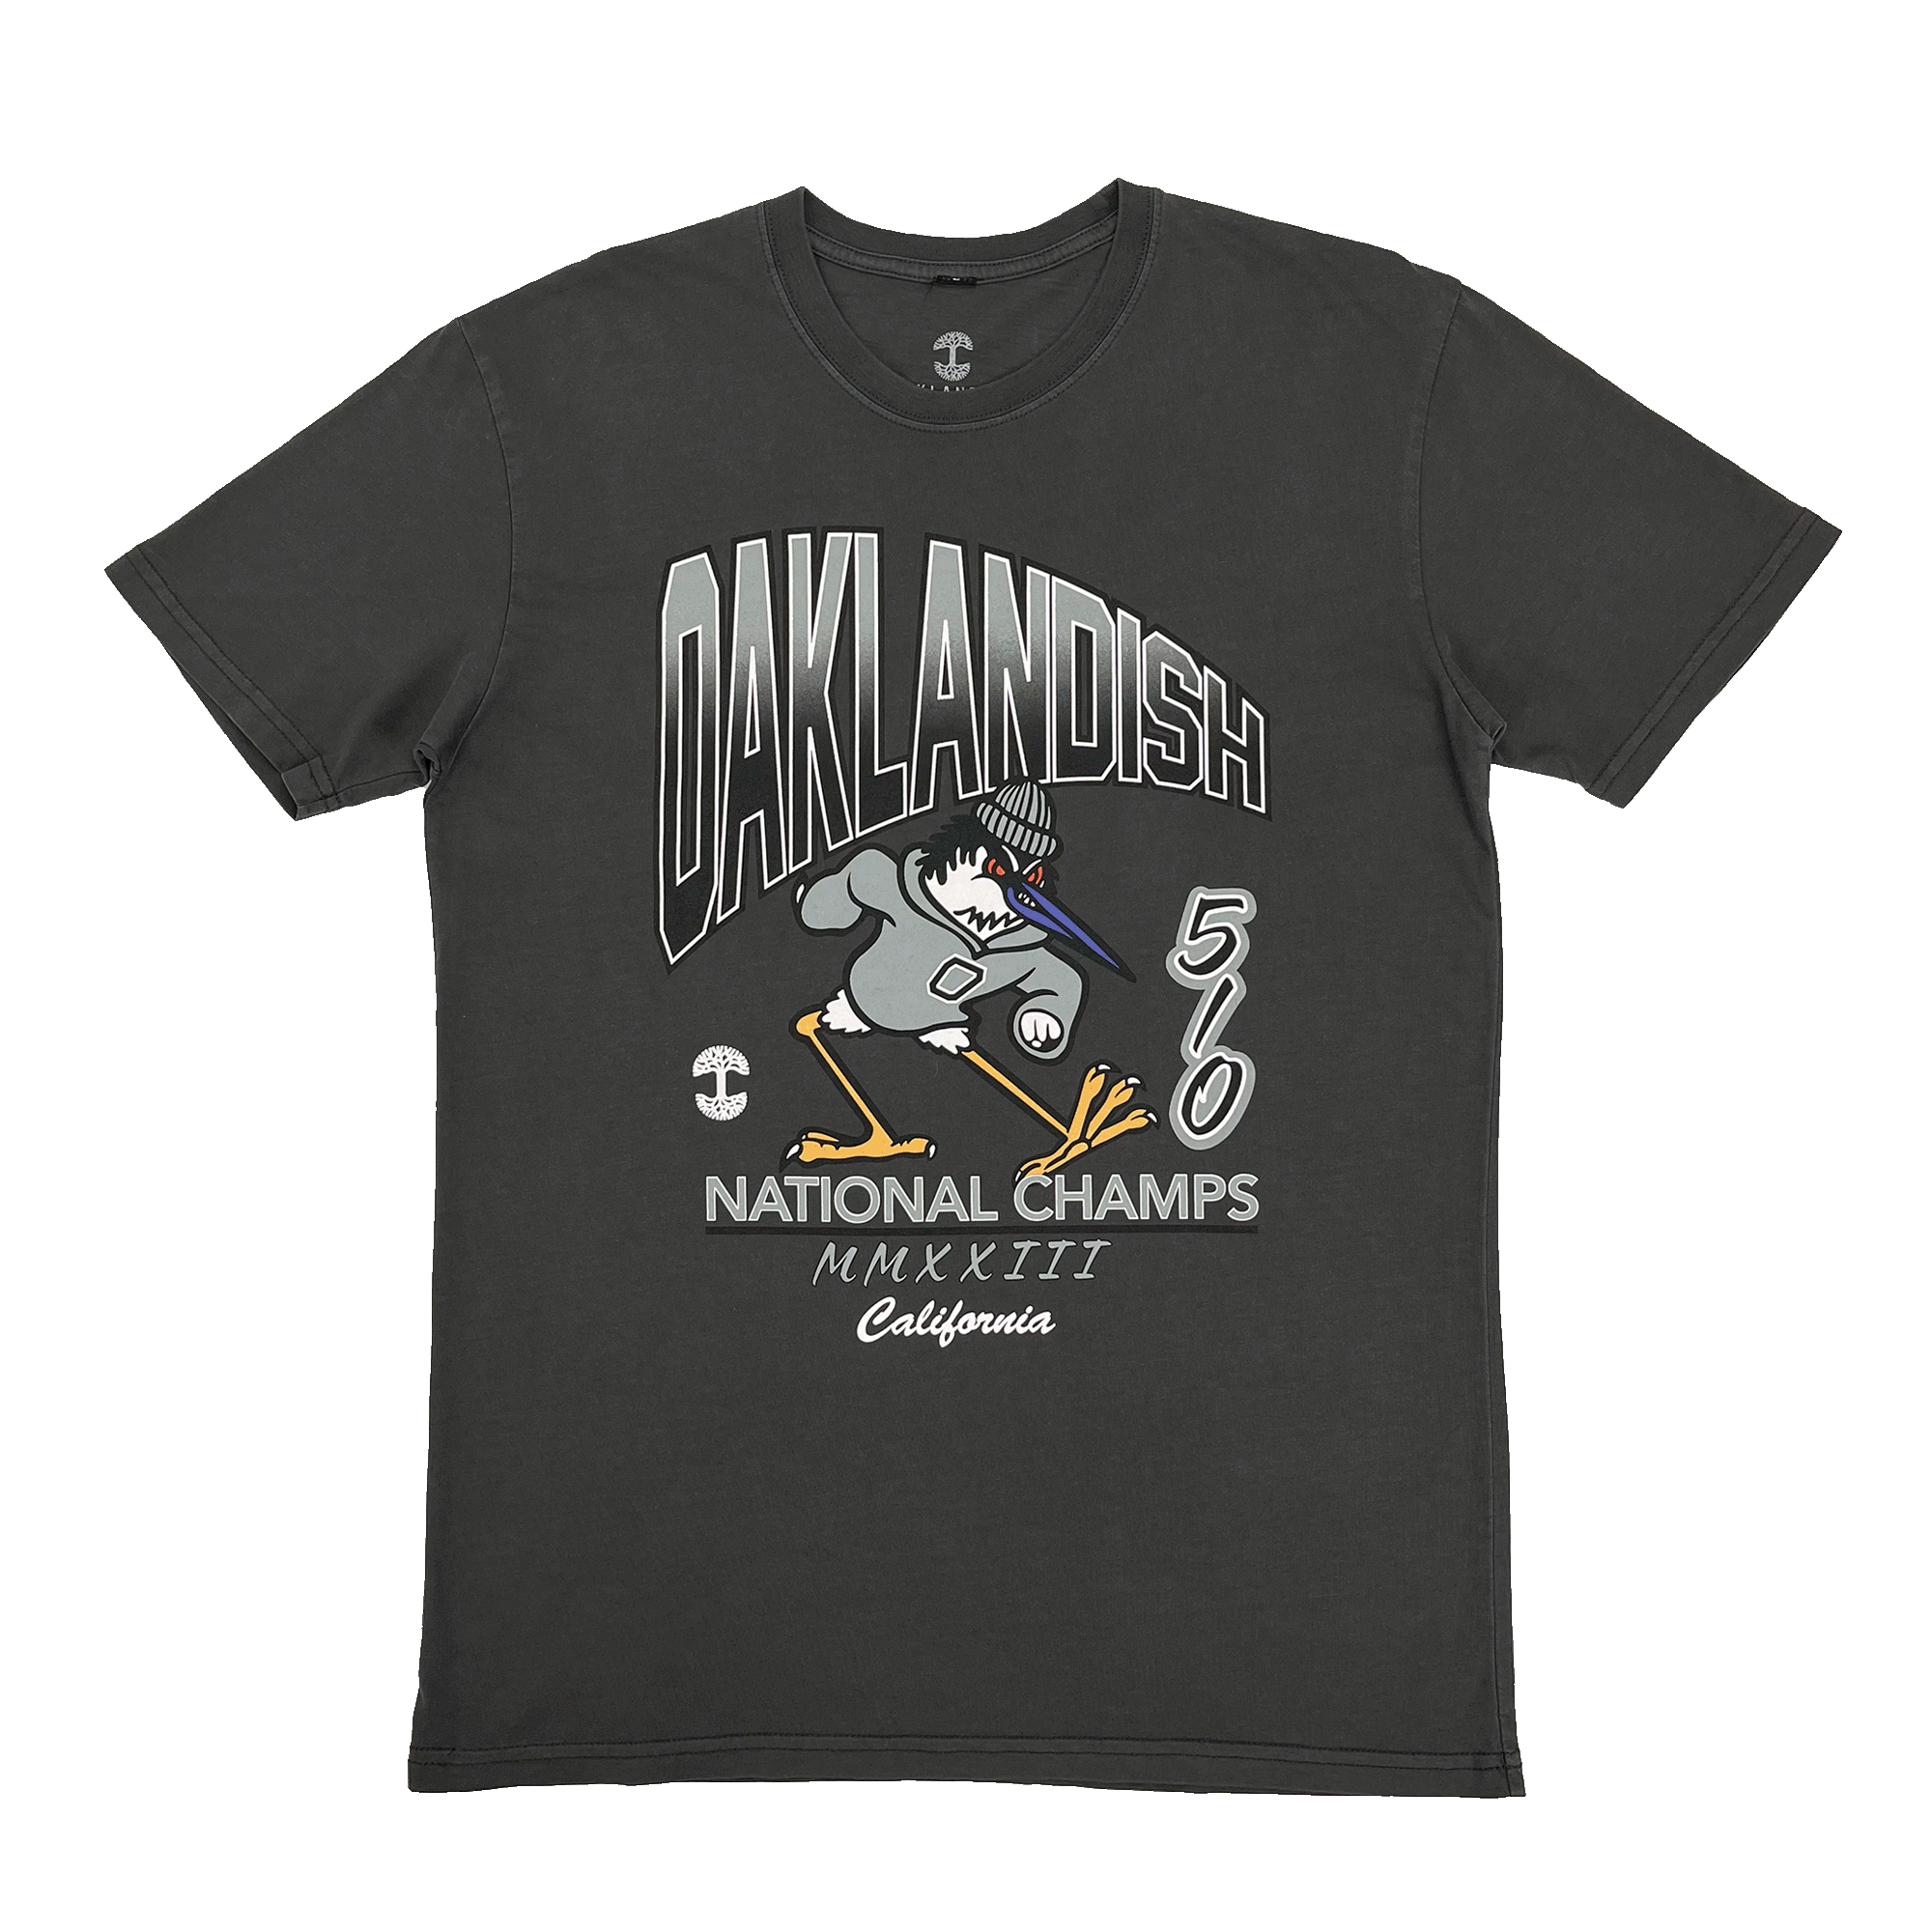 Faded black t-shirt with large OAKLANDISH, 510 NATIONAL CHAMPS wordmarks & natty bird. 